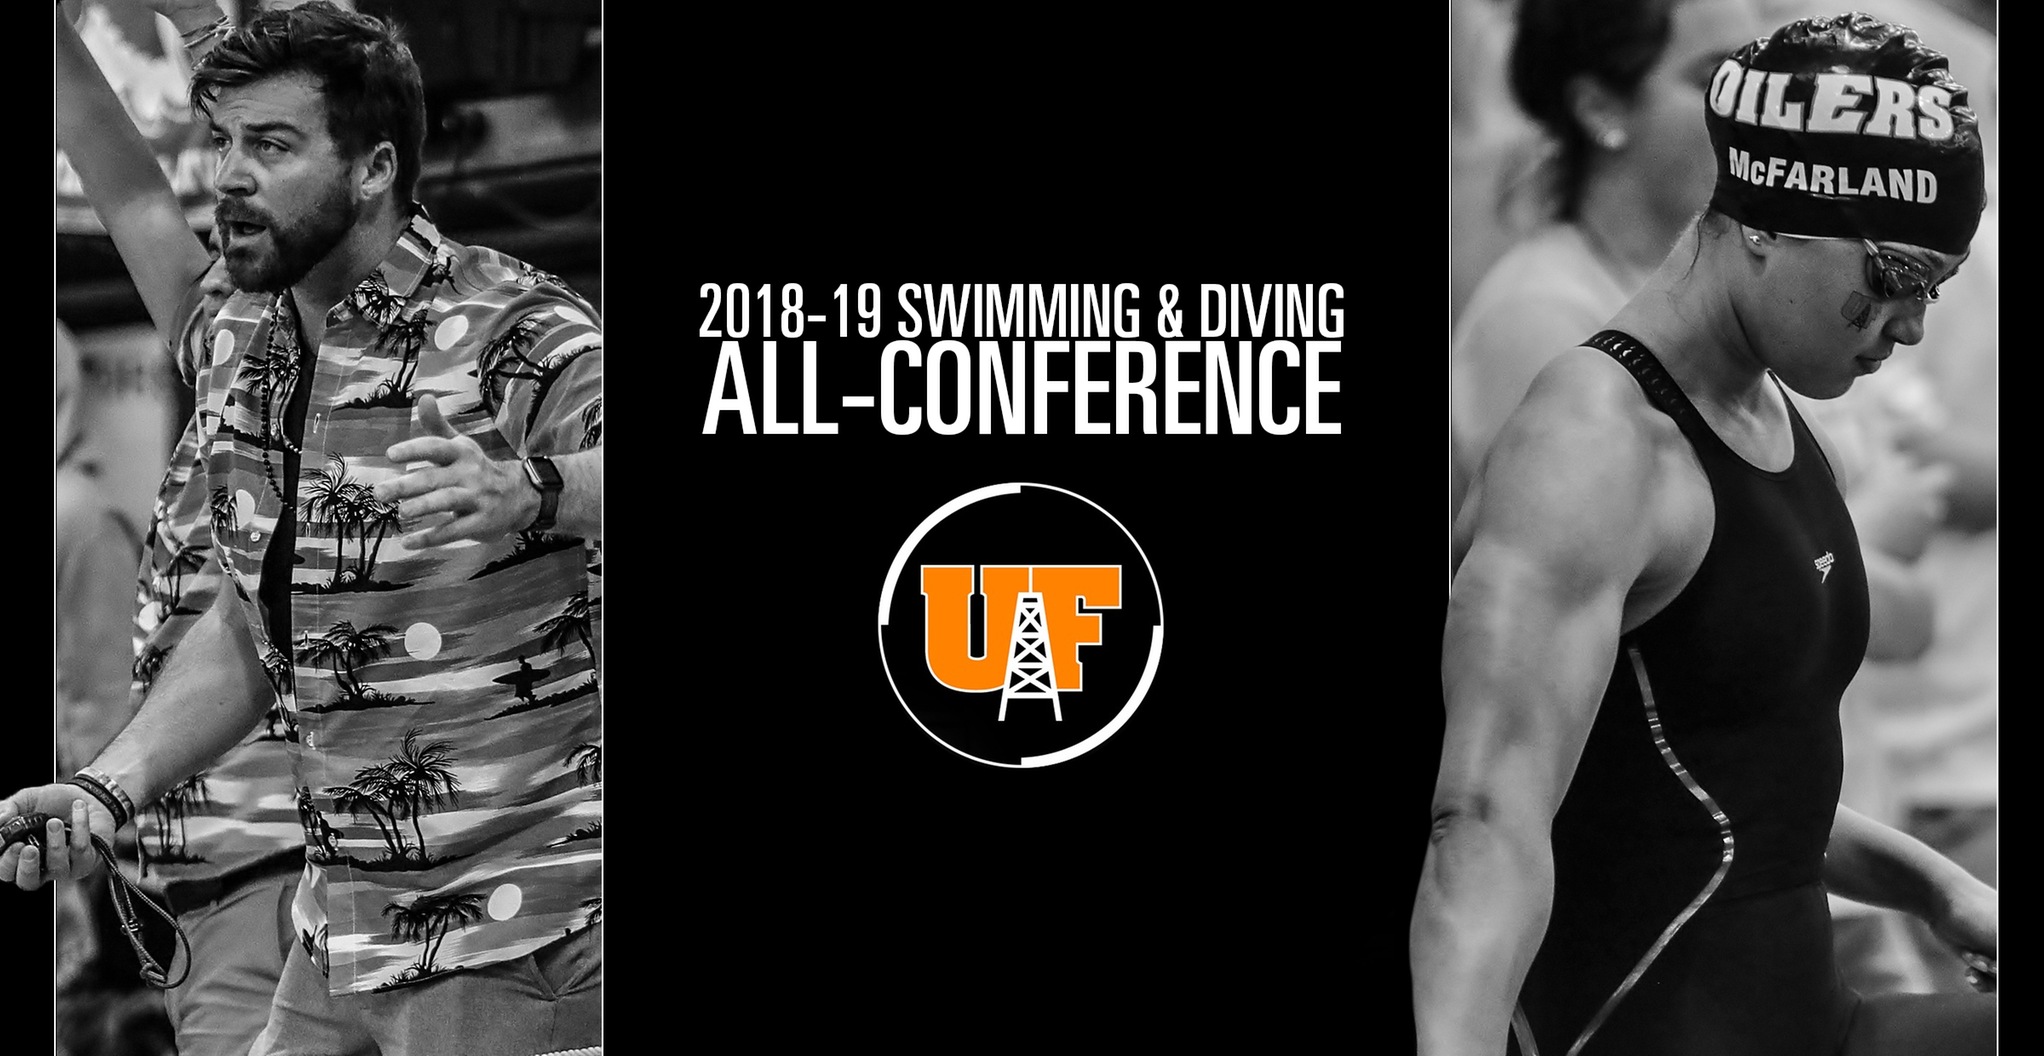 Oilers Earn 25 All-Conference Honors | McFarland is Freshman of the Year